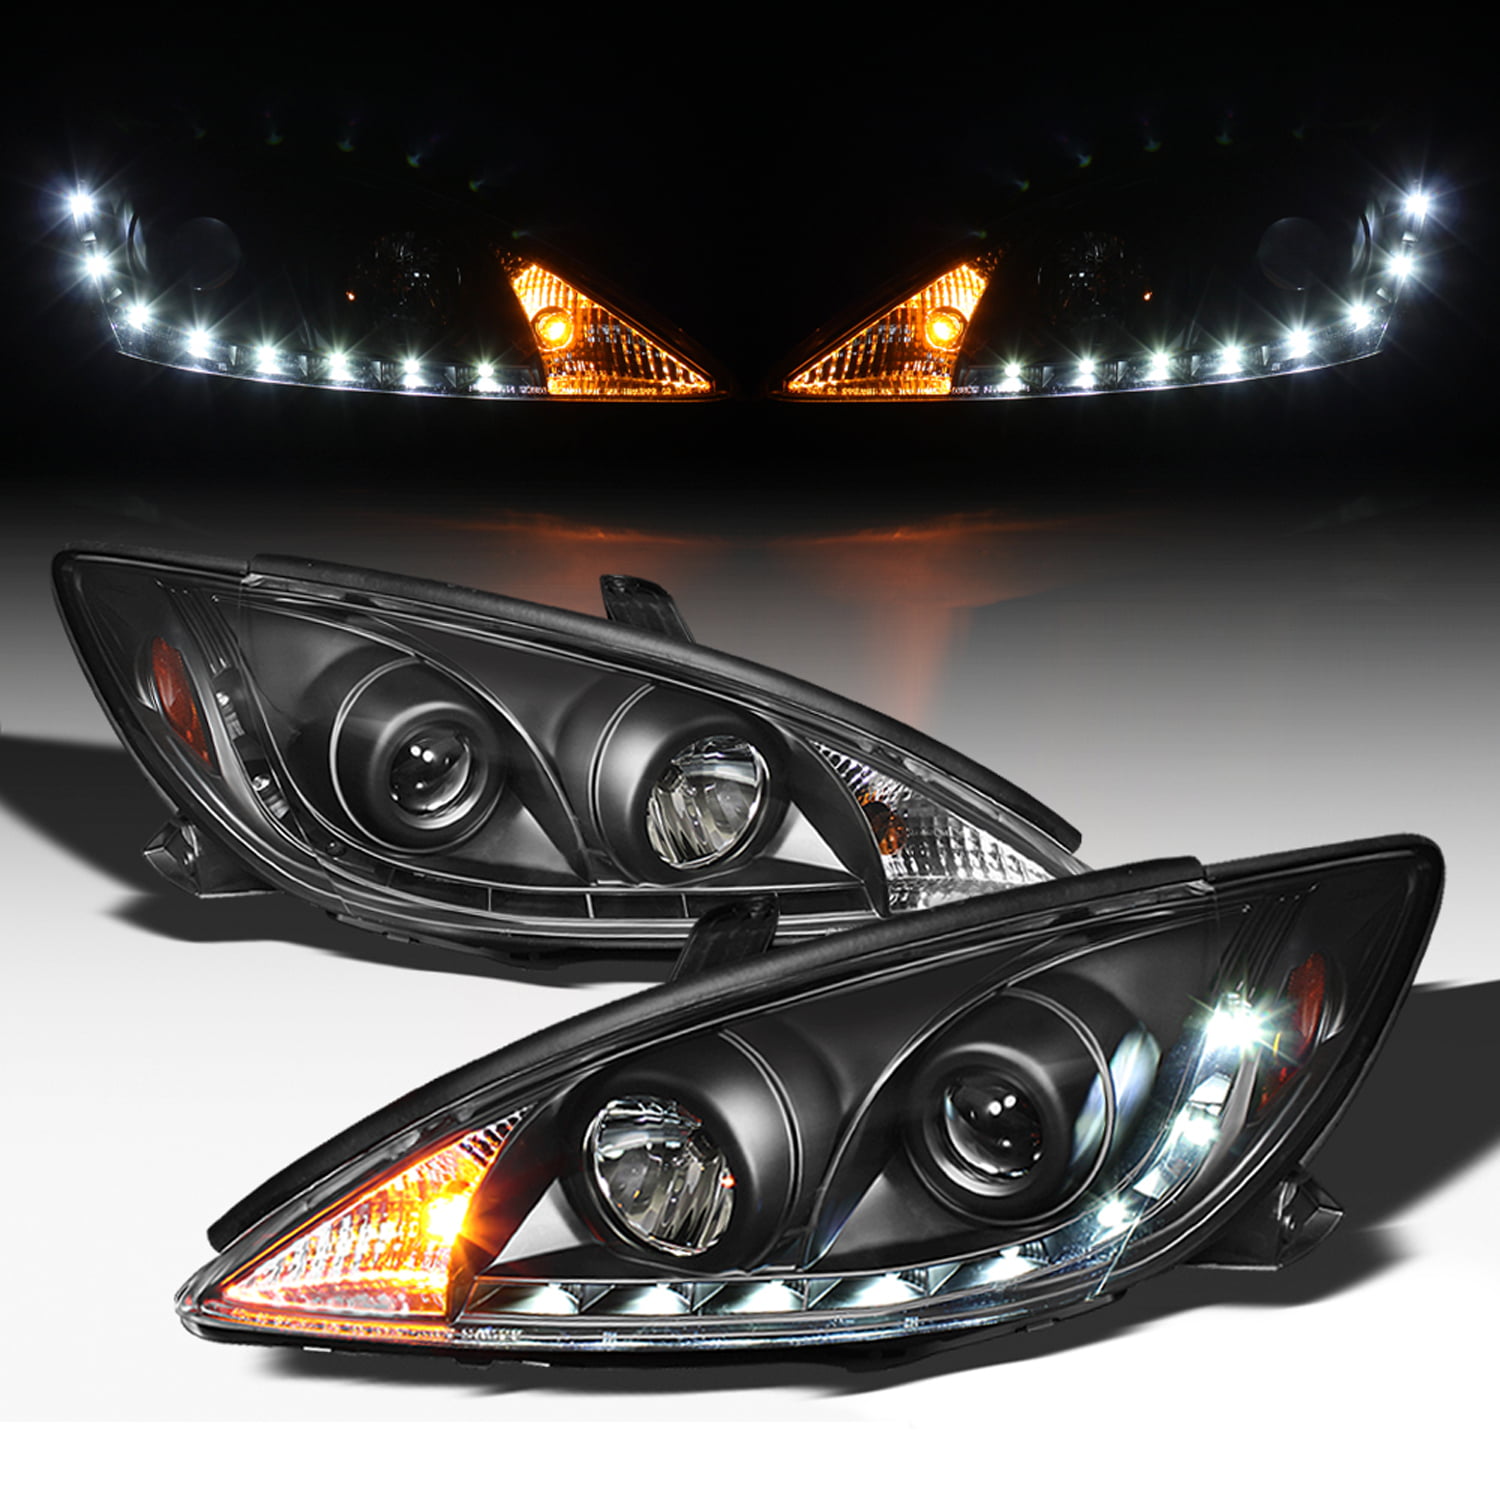 Dual LED Strip DRL Projector Headlight Lamp SET Fit 2010-12 Ford Mustang BLACK 